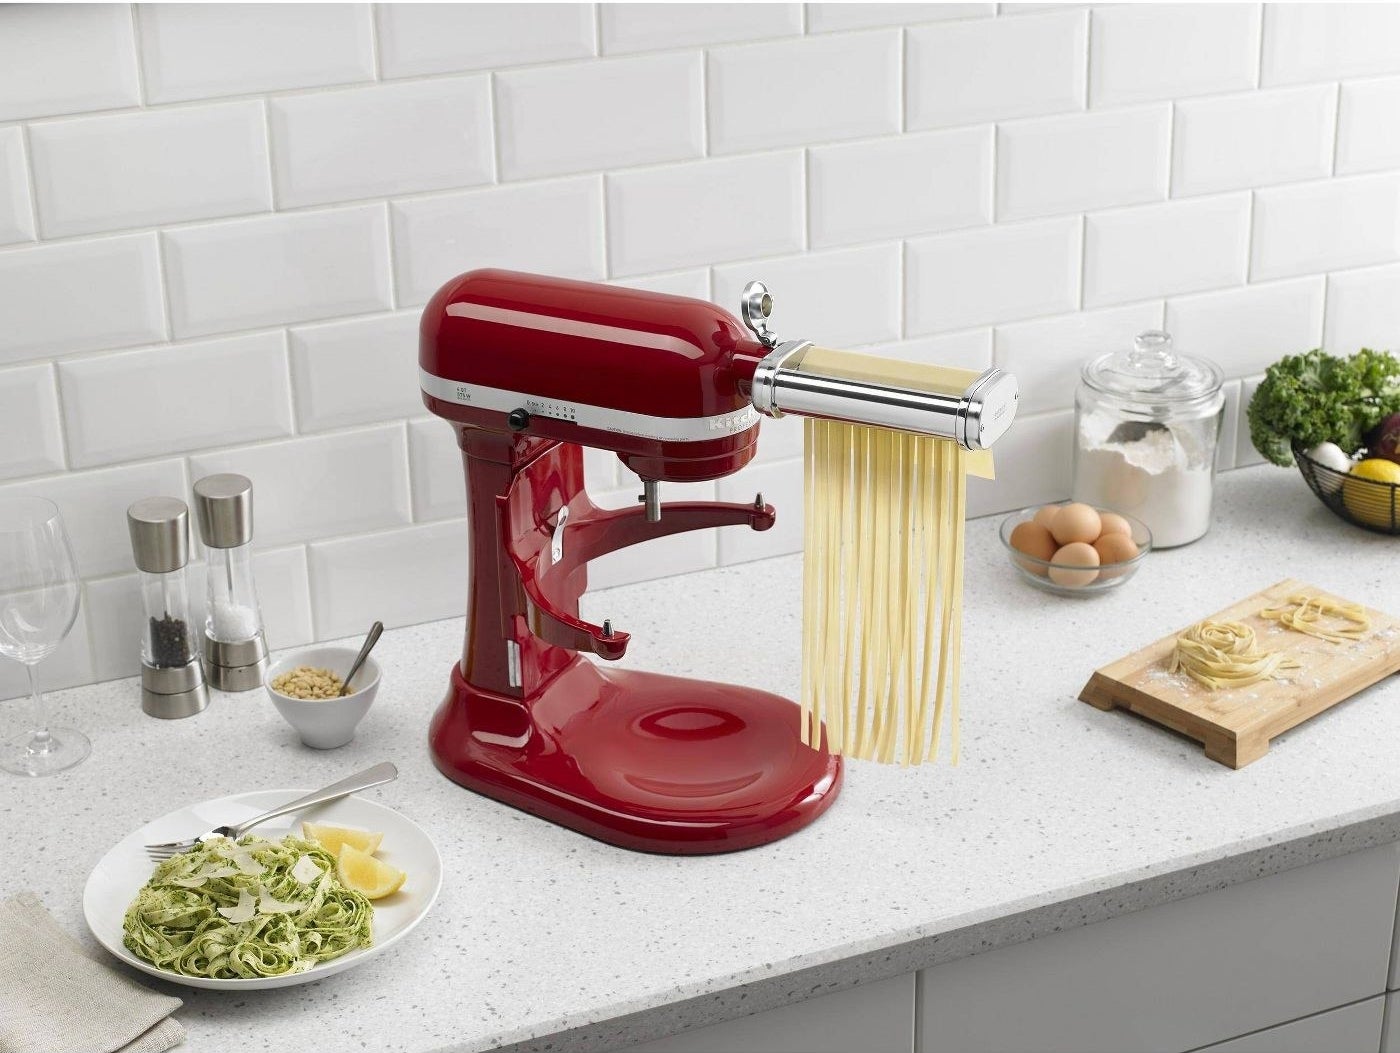 a KitchenAid blender with pasta rolling and cutting attachments staged on a kitchen counter